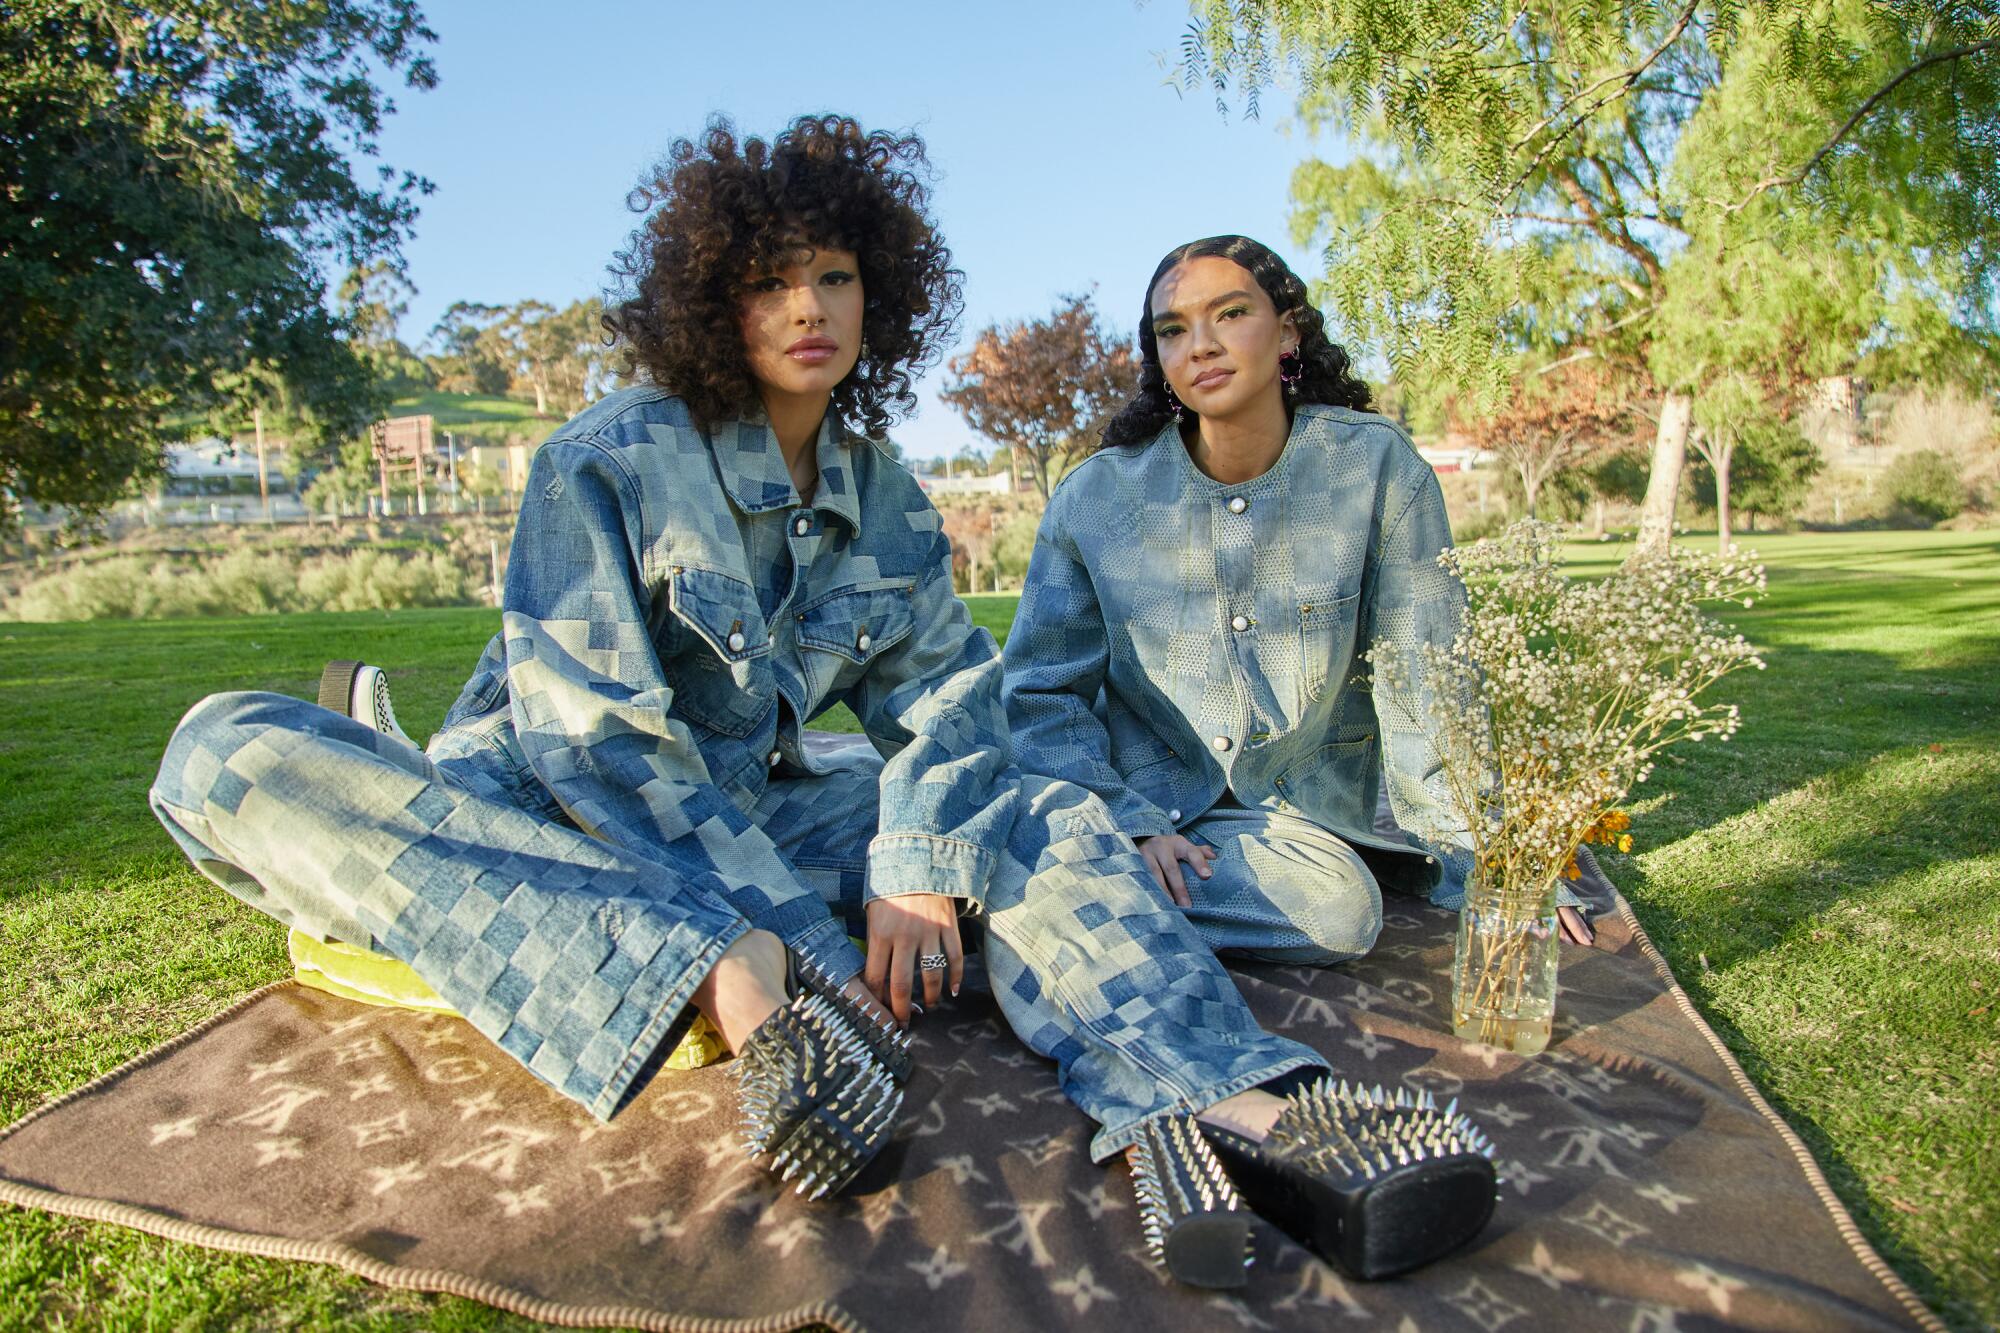 Two models wear Louis Vuitton denim outfits on a picnic blanket in the park.